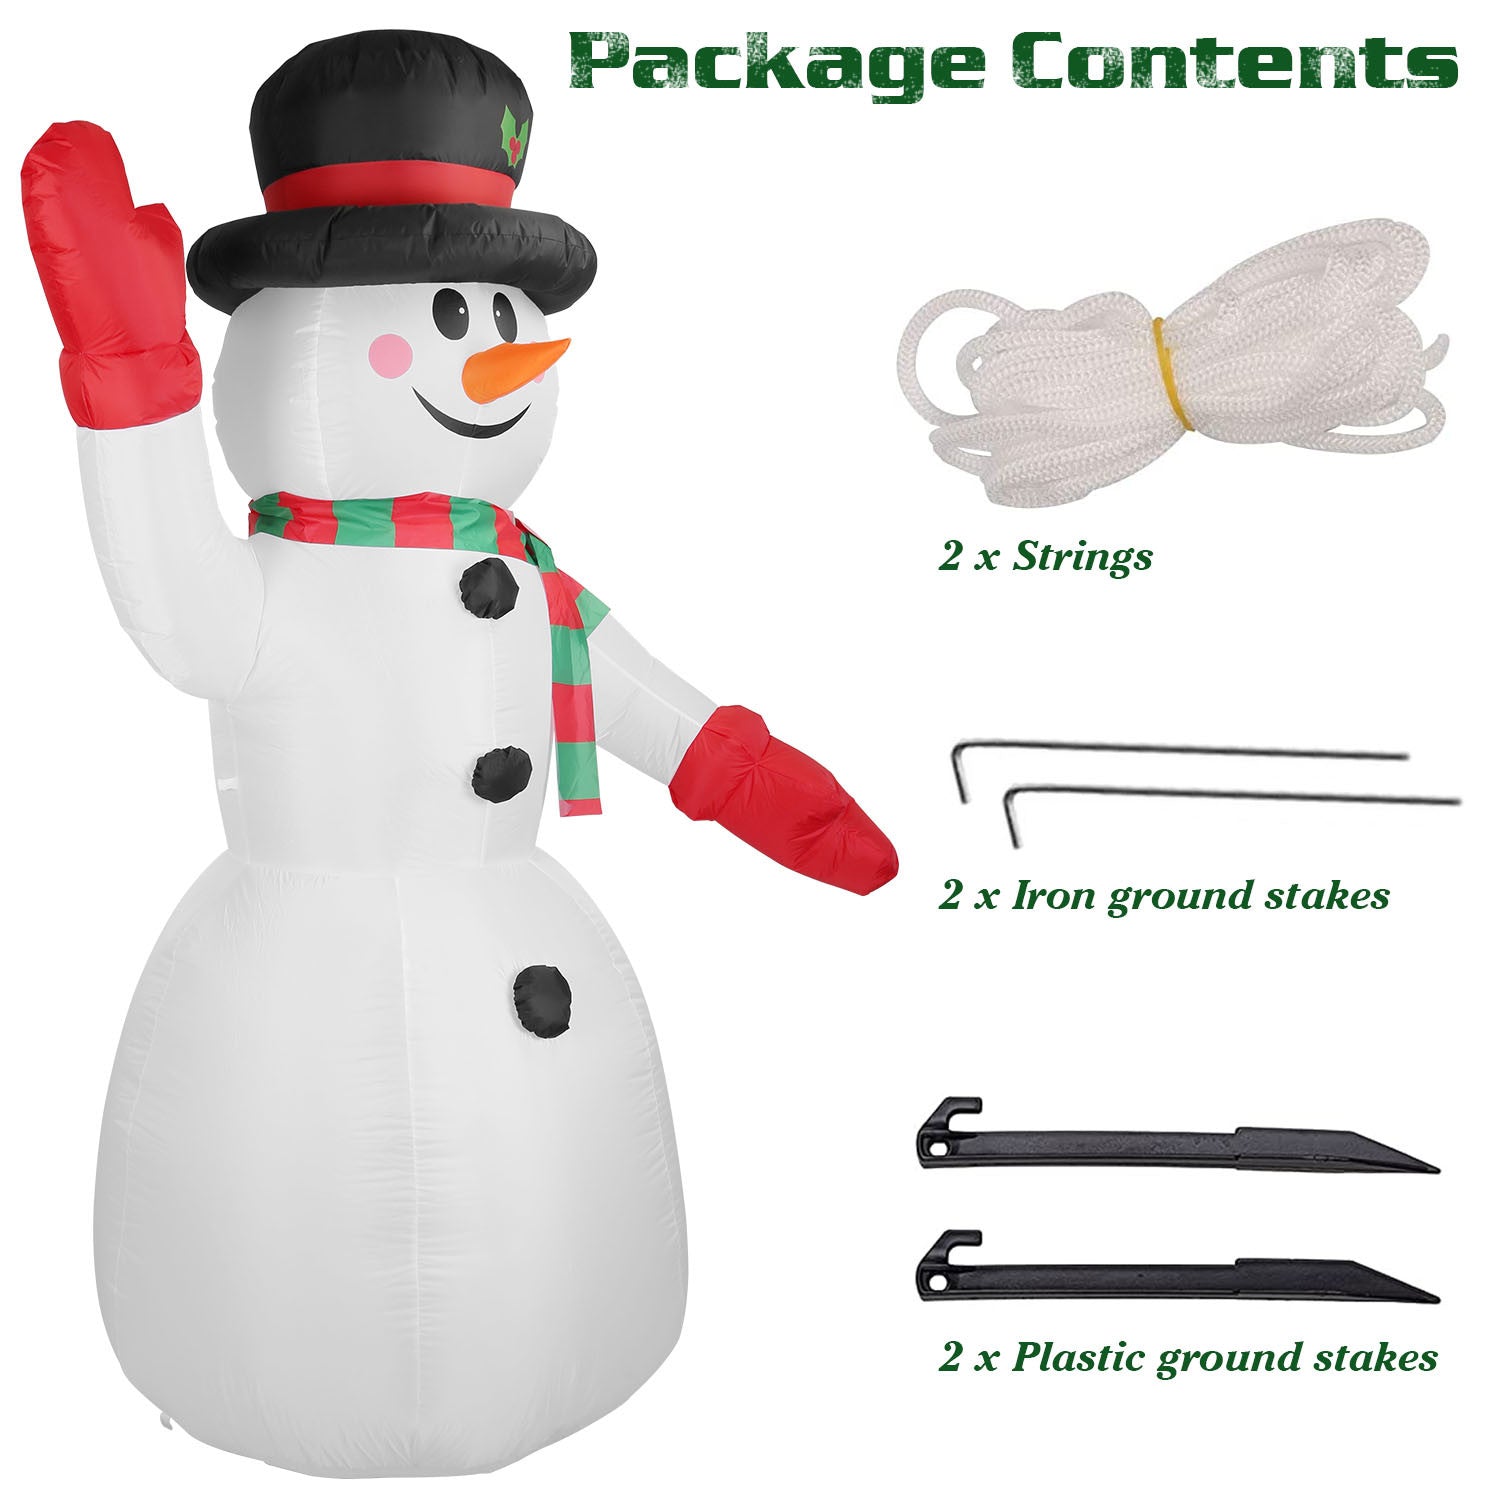 7.9FT Christmas Inflatable Giant Snowman Blow up Light up Snowman adorned with LED lights.